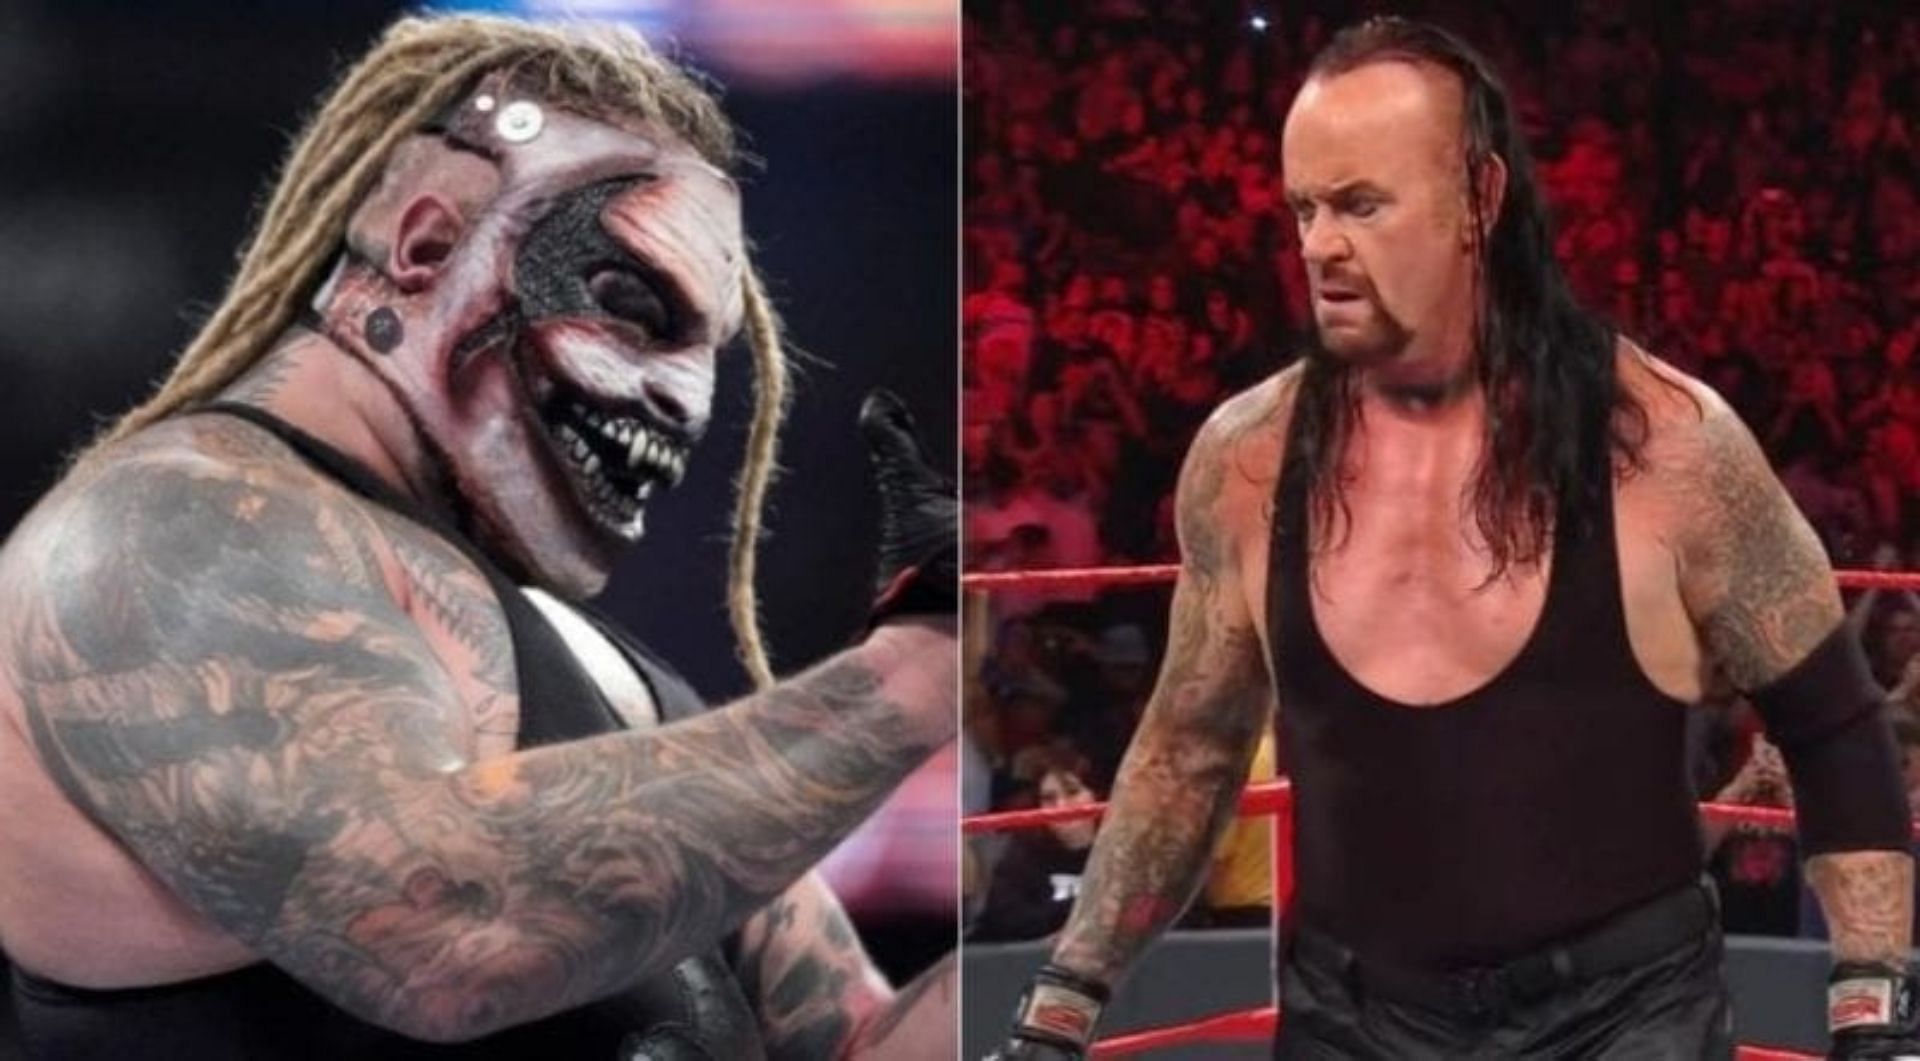 The Undertaker and Bray Wyatt played supernatural characters in WWE